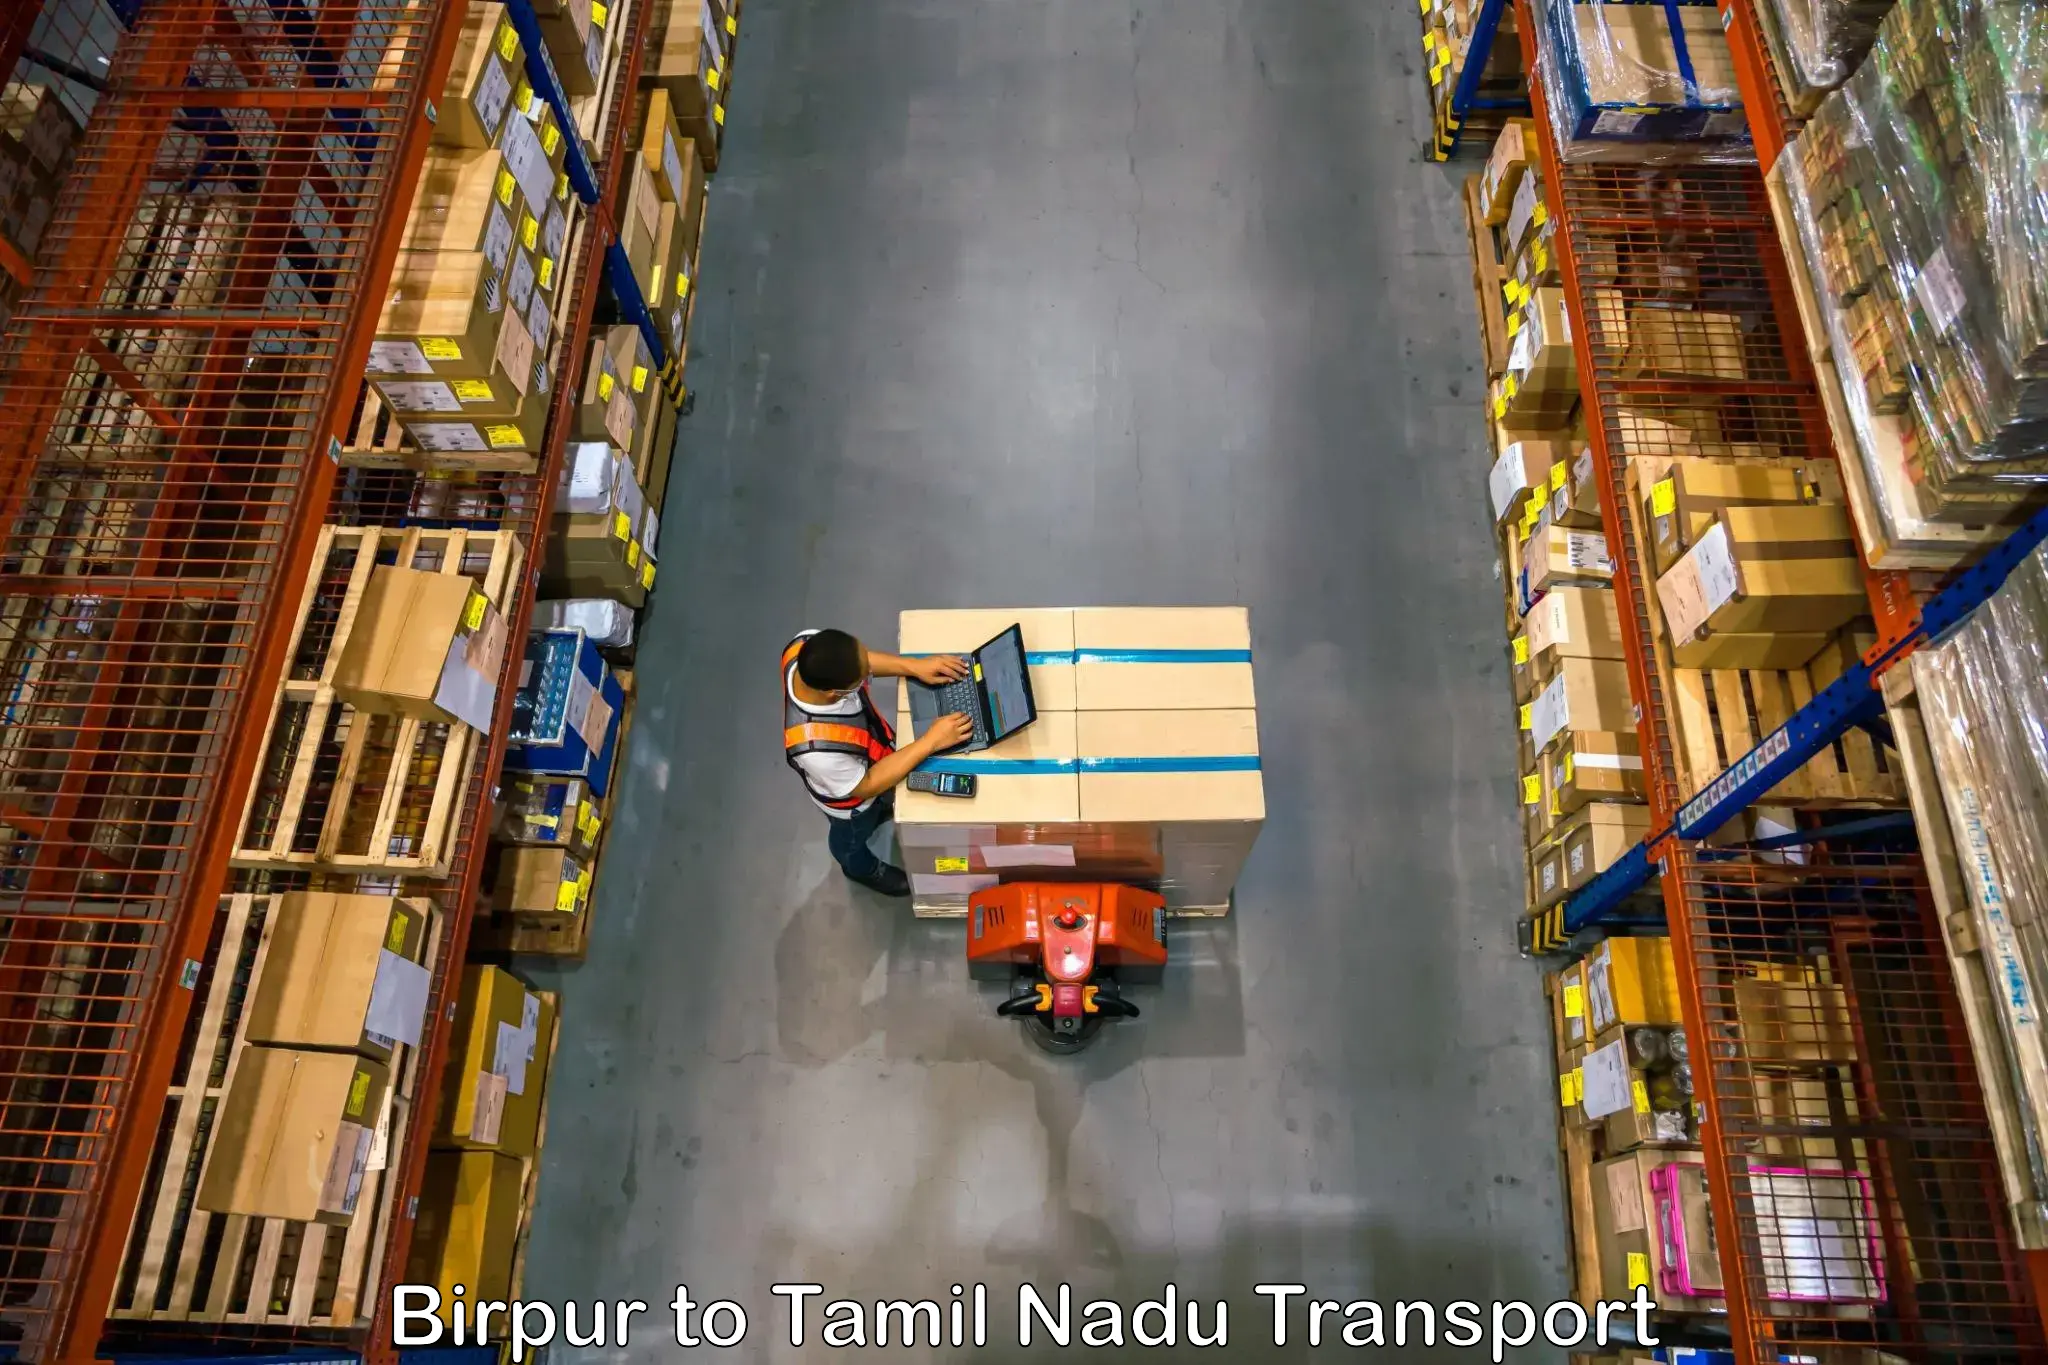 Truck transport companies in India in Birpur to Chennai